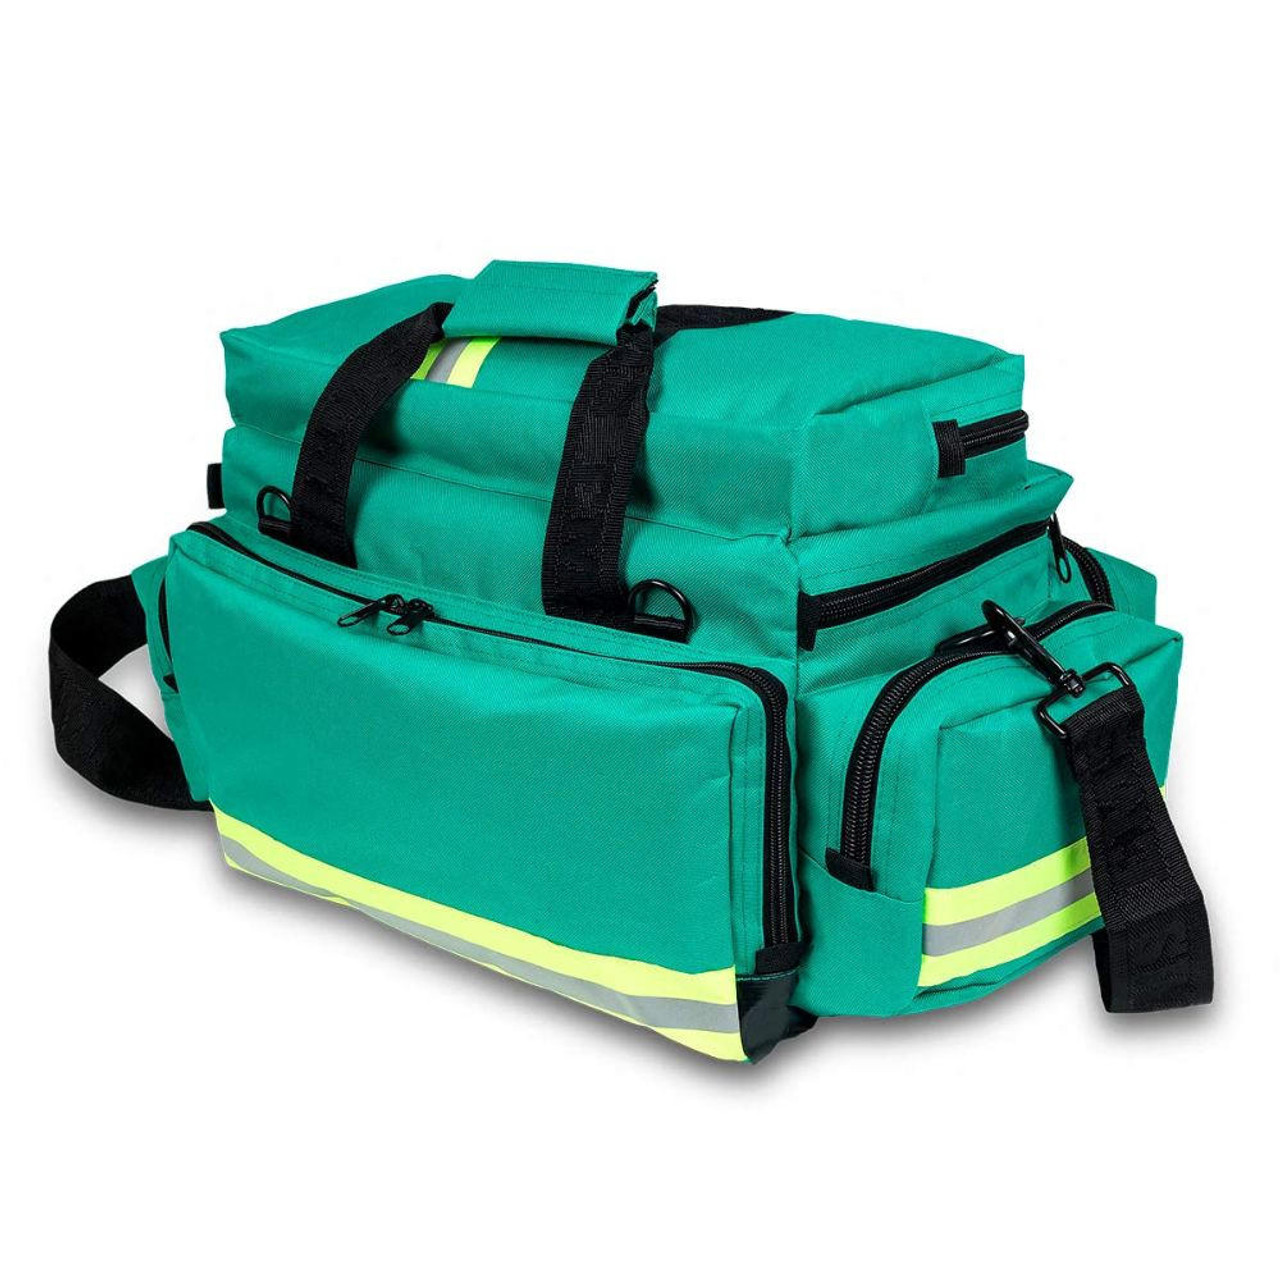  Large Emergency Medical First Aid Bag Green Polyester 57 Litre 